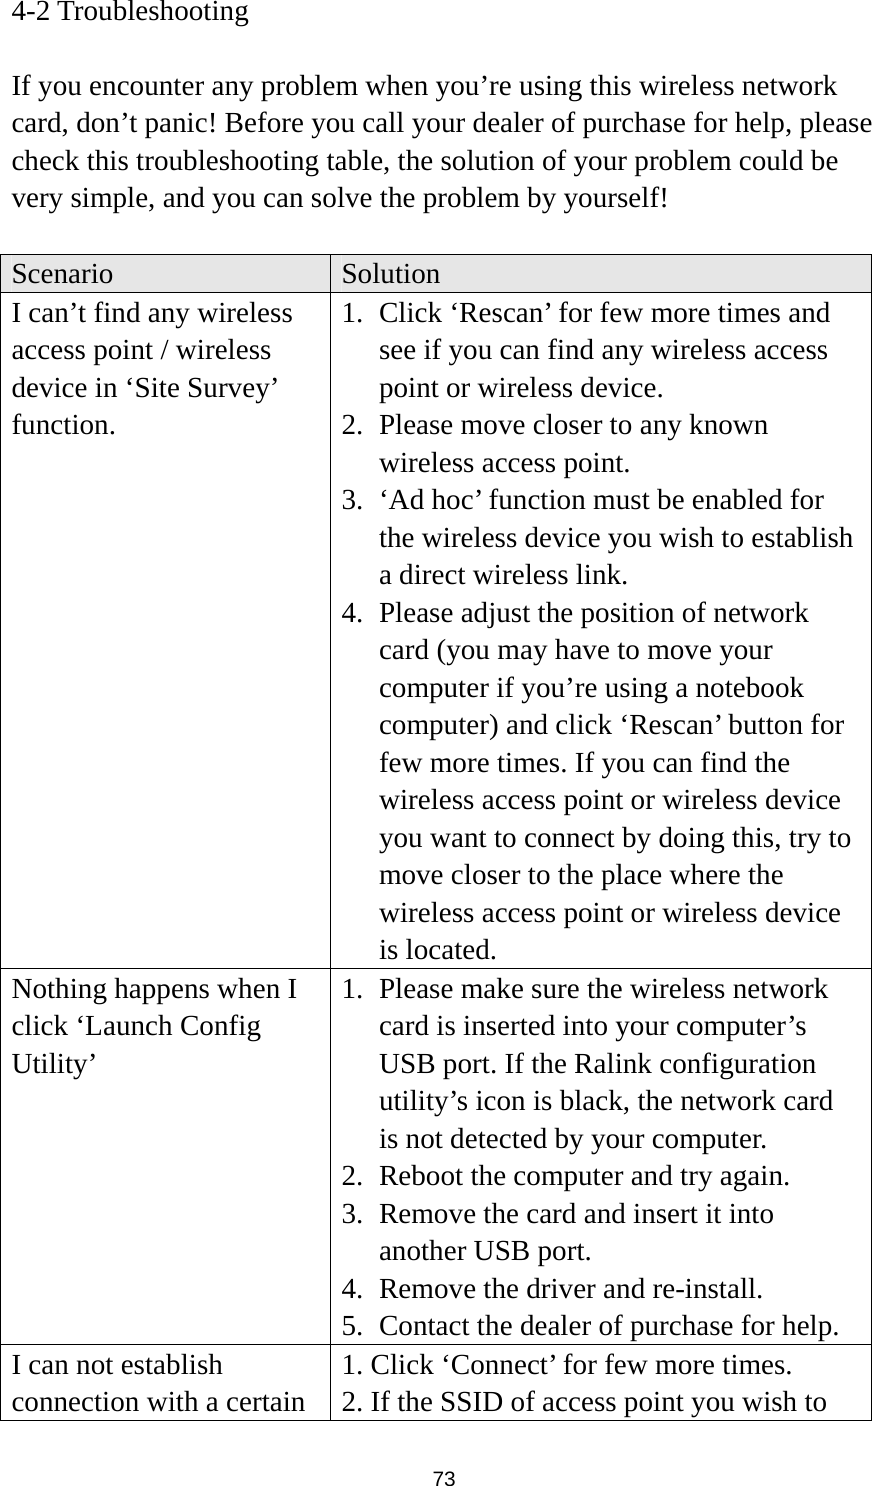  73 4-2 Troubleshooting  If you encounter any problem when you’re using this wireless network card, don’t panic! Before you call your dealer of purchase for help, please check this troubleshooting table, the solution of your problem could be very simple, and you can solve the problem by yourself!  Scenario  Solution I can’t find any wireless access point / wireless device in ‘Site Survey’ function. 1. Click ‘Rescan’ for few more times and see if you can find any wireless access point or wireless device. 2. Please move closer to any known wireless access point. 3. ‘Ad hoc’ function must be enabled for the wireless device you wish to establish a direct wireless link. 4. Please adjust the position of network card (you may have to move your computer if you’re using a notebook computer) and click ‘Rescan’ button for few more times. If you can find the wireless access point or wireless device you want to connect by doing this, try to move closer to the place where the wireless access point or wireless device is located. Nothing happens when I click ‘Launch Config Utility’ 1. Please make sure the wireless network card is inserted into your computer’s USB port. If the Ralink configuration utility’s icon is black, the network card is not detected by your computer. 2. Reboot the computer and try again. 3. Remove the card and insert it into another USB port. 4. Remove the driver and re-install. 5. Contact the dealer of purchase for help. I can not establish connection with a certain 1. Click ‘Connect’ for few more times. 2. If the SSID of access point you wish to 